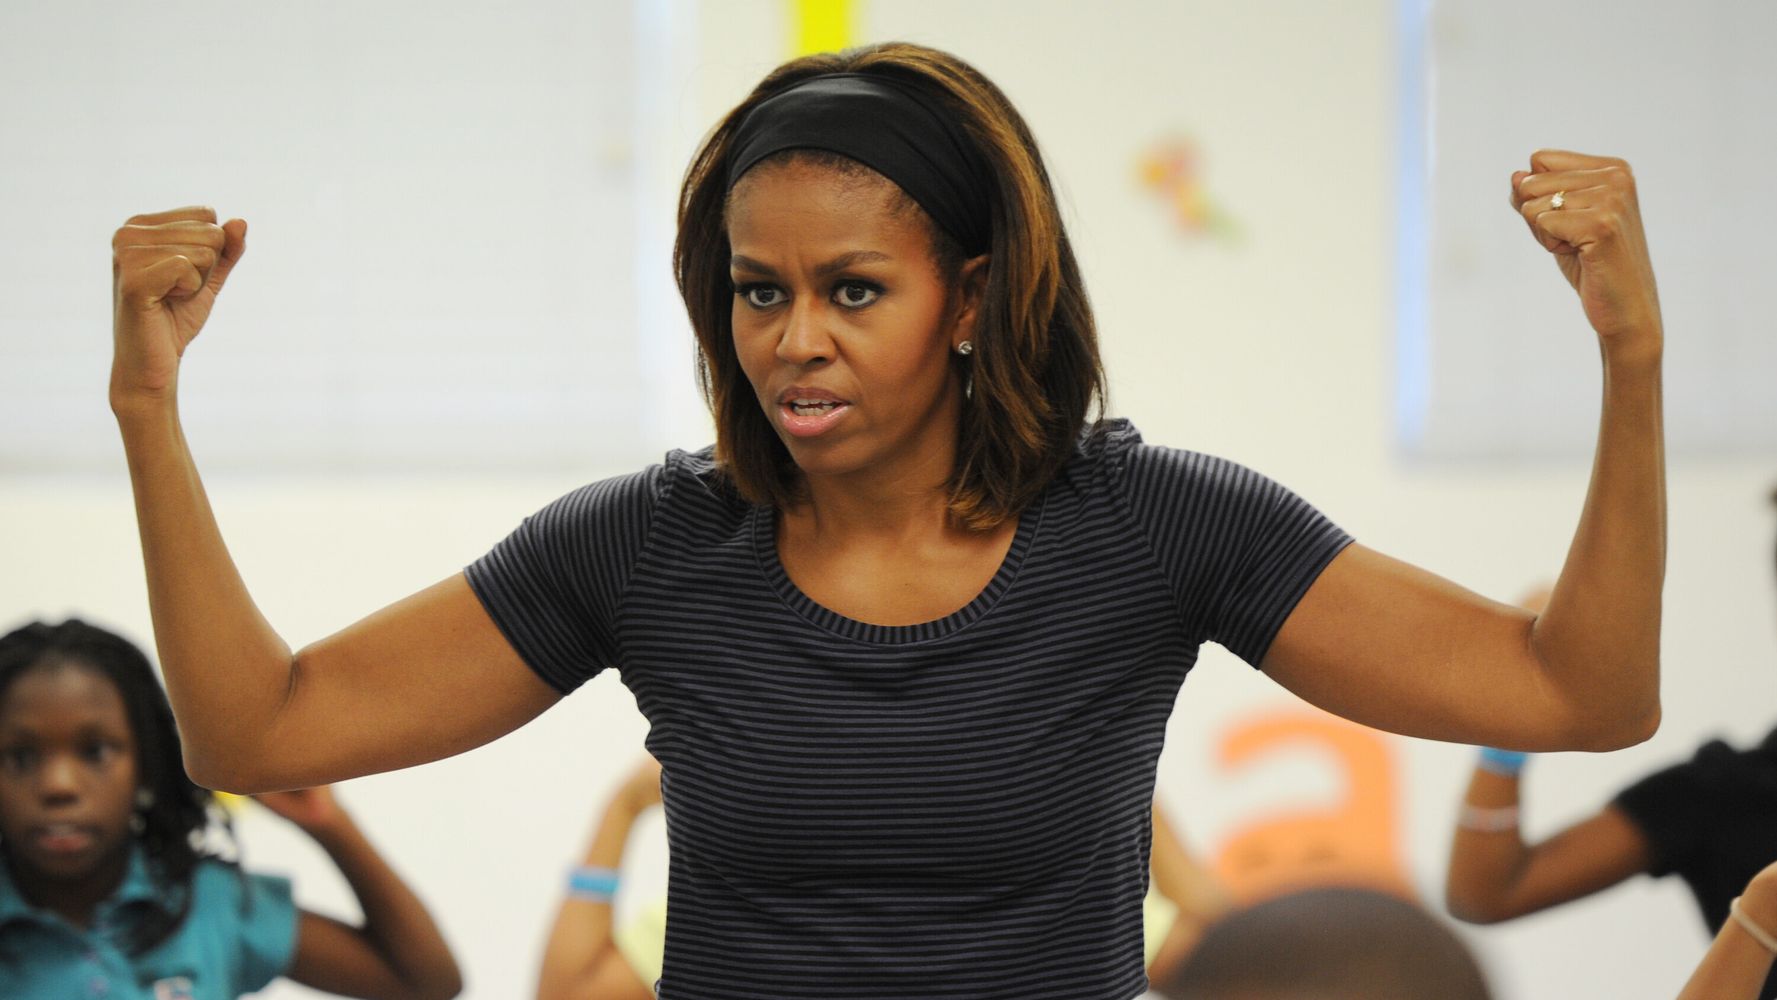 Michelle Obamas New Workout Playlist Will Make You Hit The Gym Hard Huffpost Canada Politics